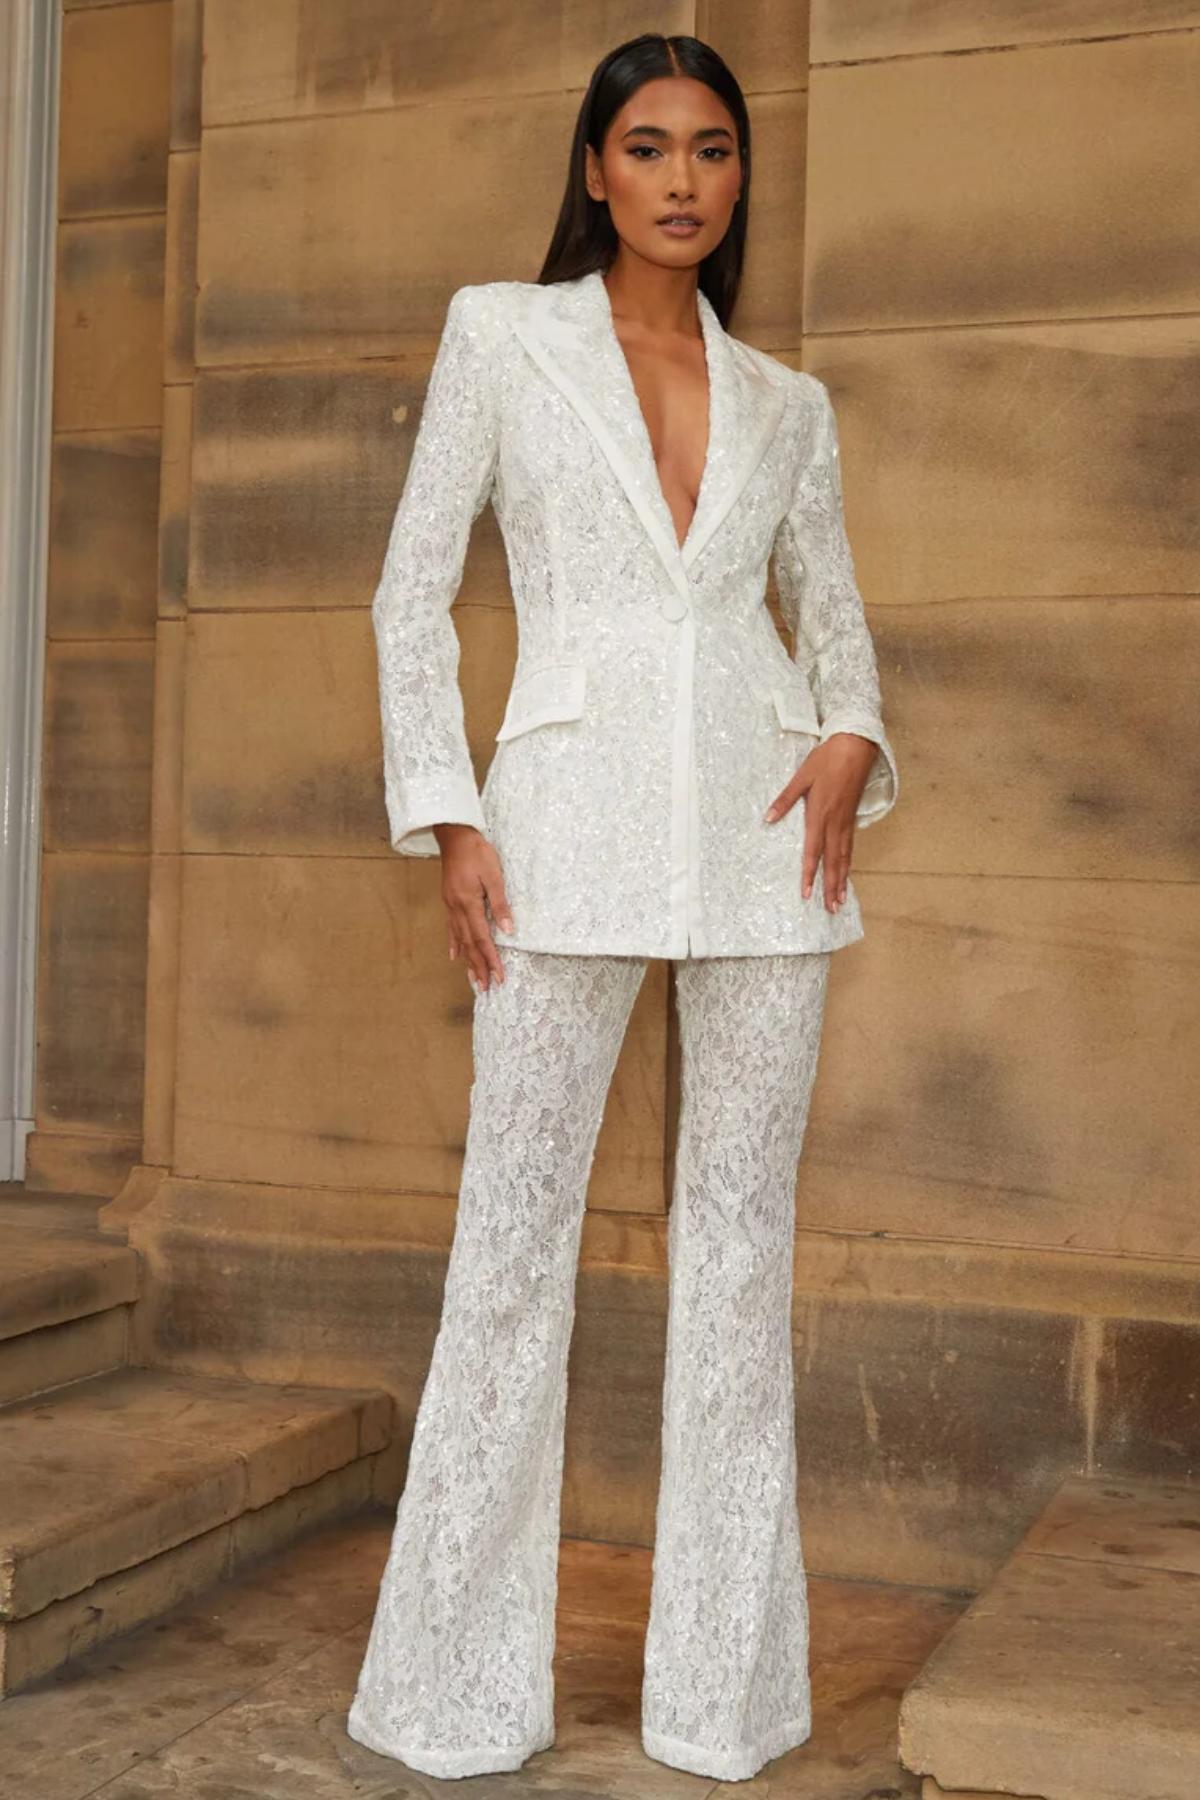 21 Chic Wedding Suits For Women Who Want to Rock a Bridal Suit | Women suits  wedding, Wedding suits, Wedding outfits for women